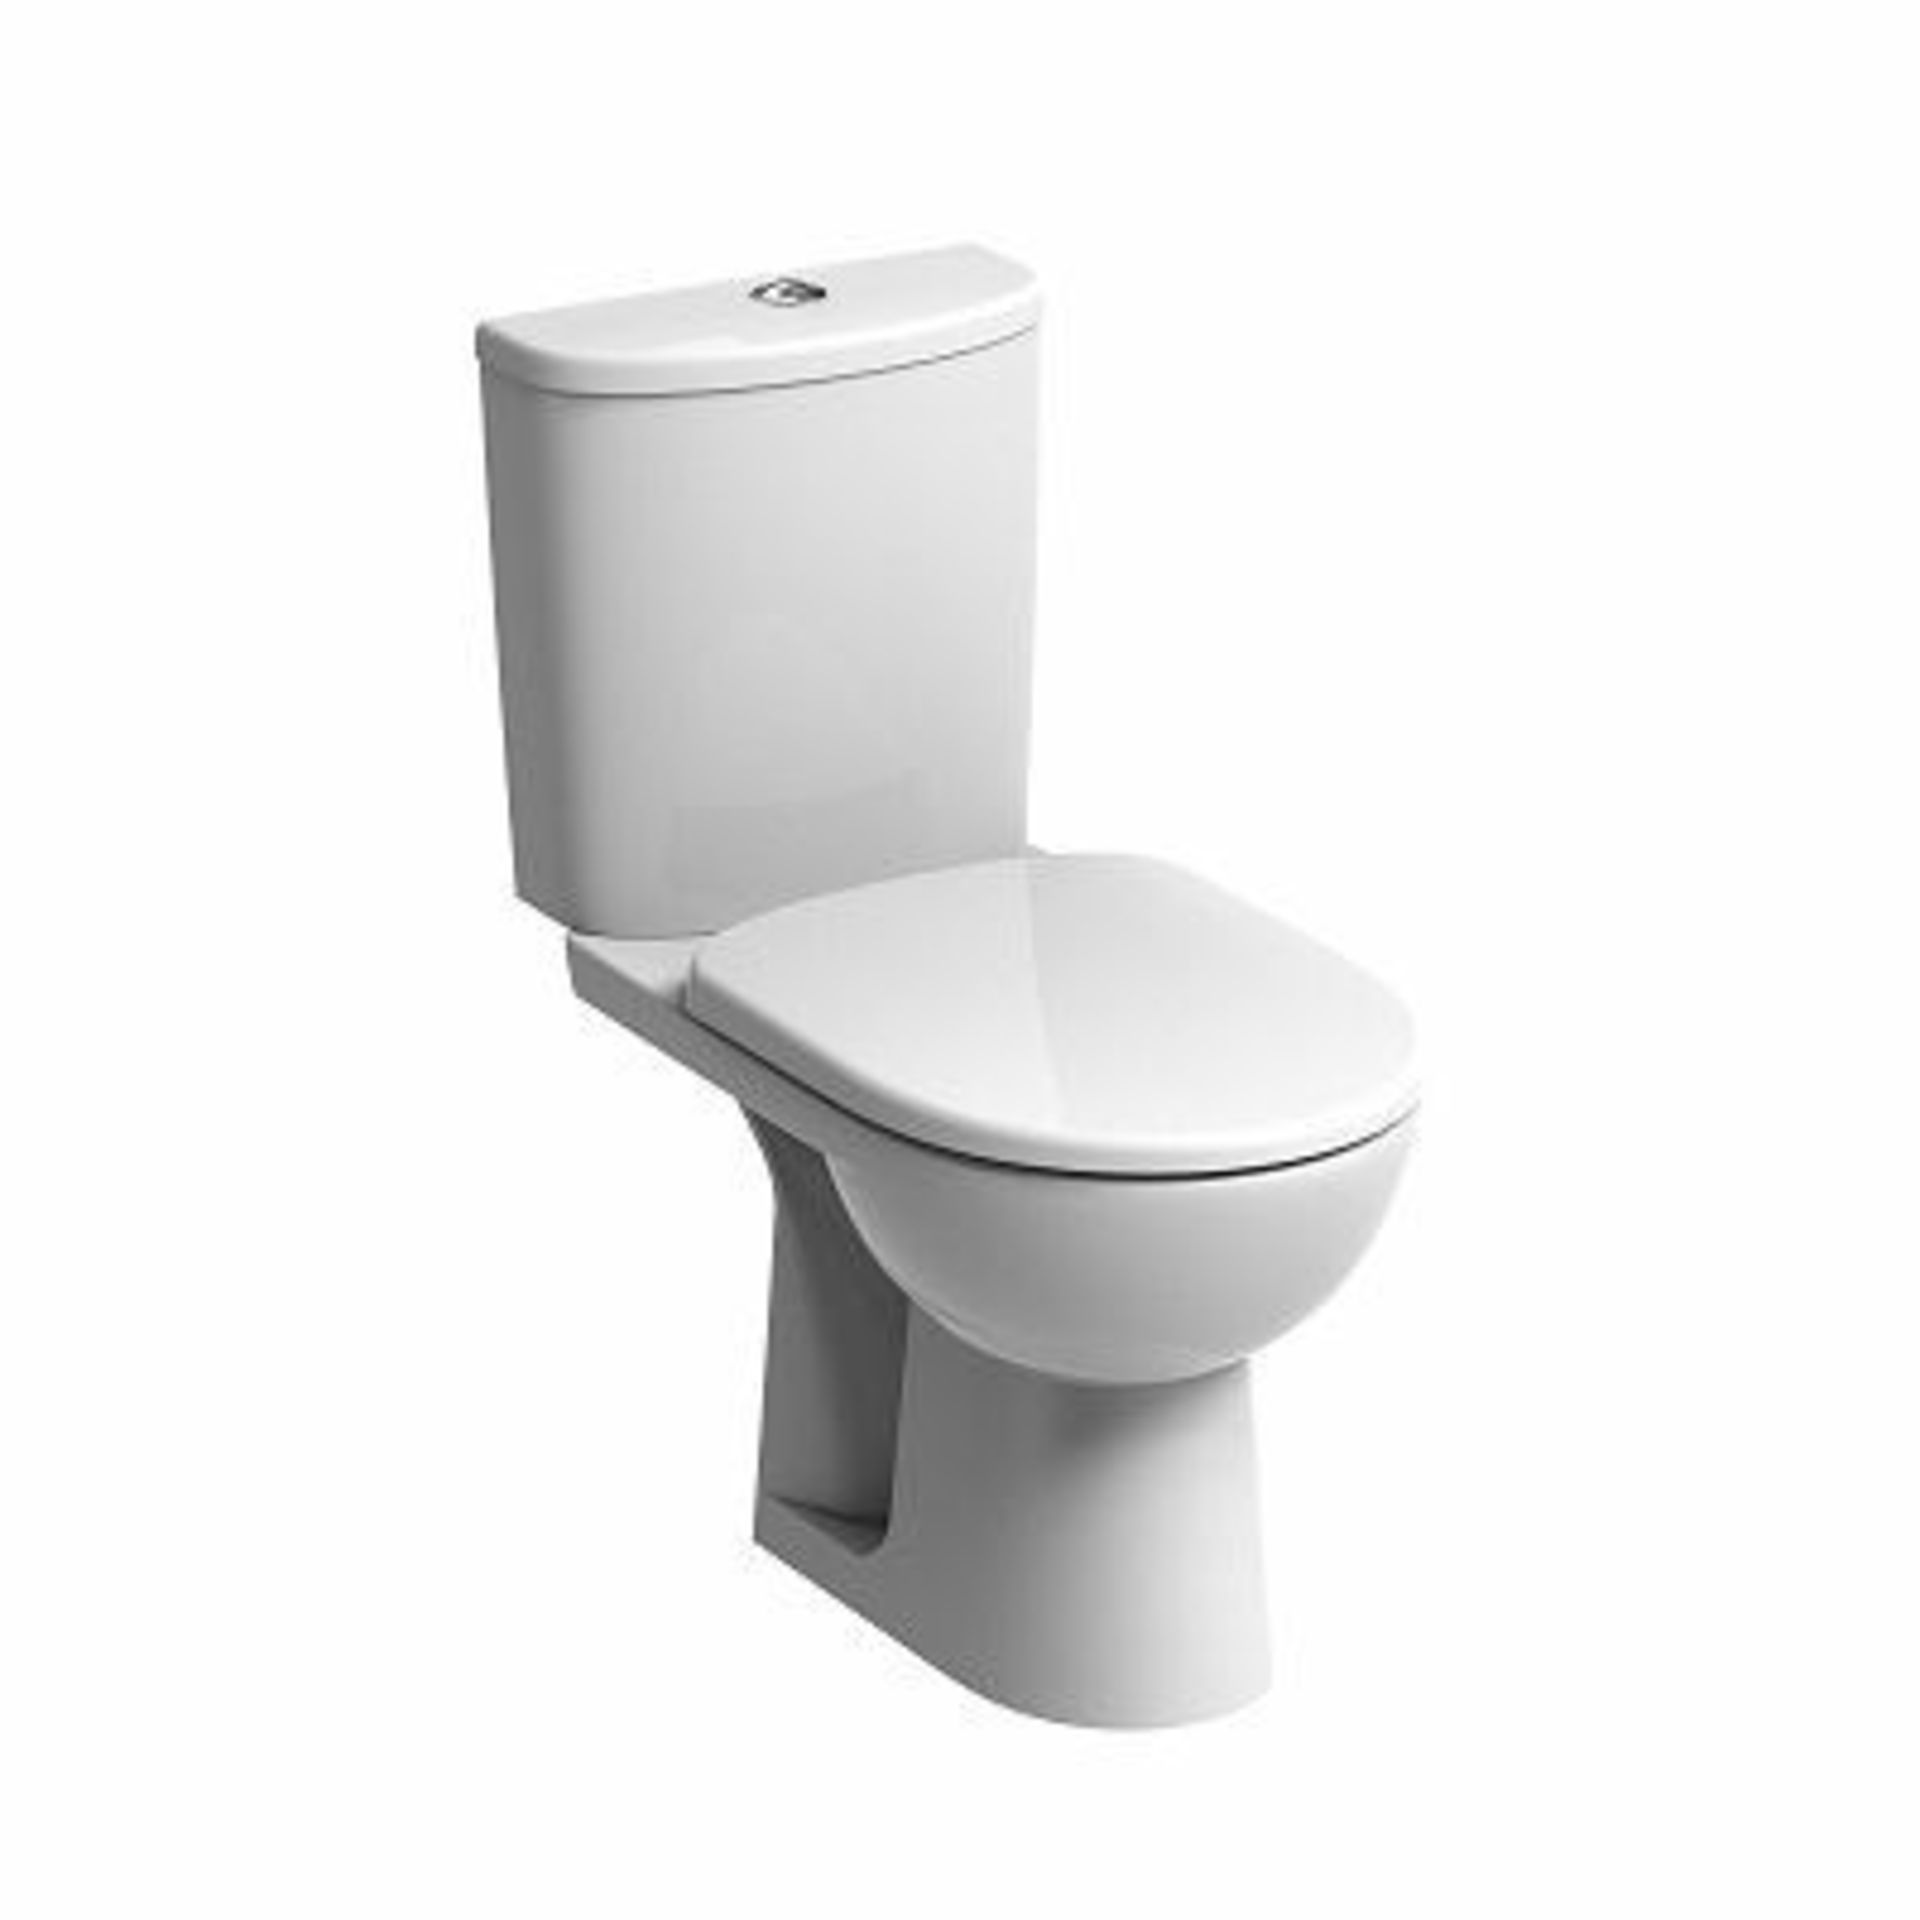 PALLET TO CONTAIN 8 x BRAND NEW BOXED Twyford Fiji Round Close Coupled Toilet Set. RRP £399.99... - Image 2 of 2